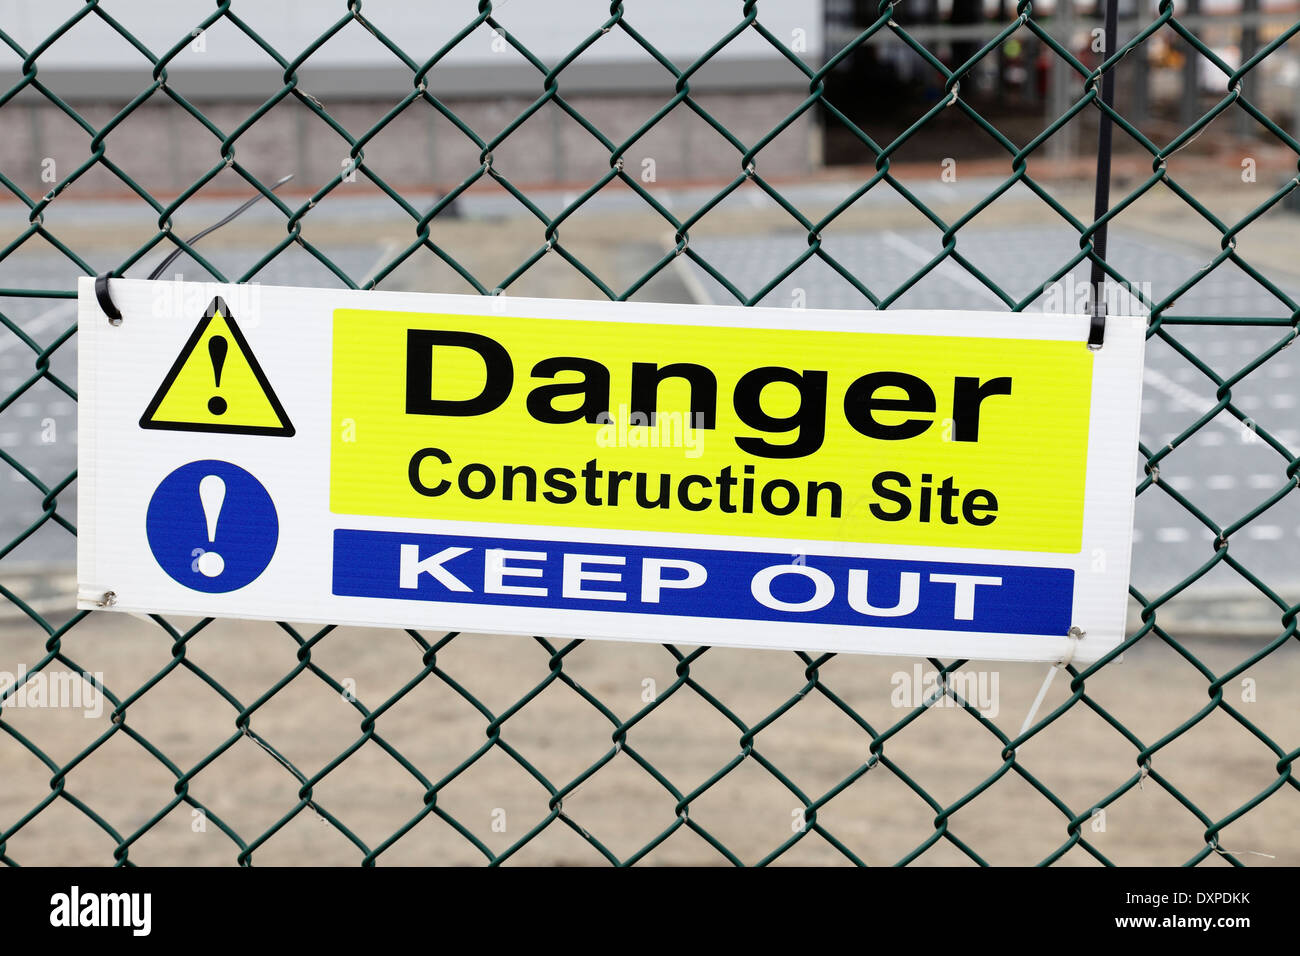 Construction Site Danger Keep Out sign, UK Stock Photo